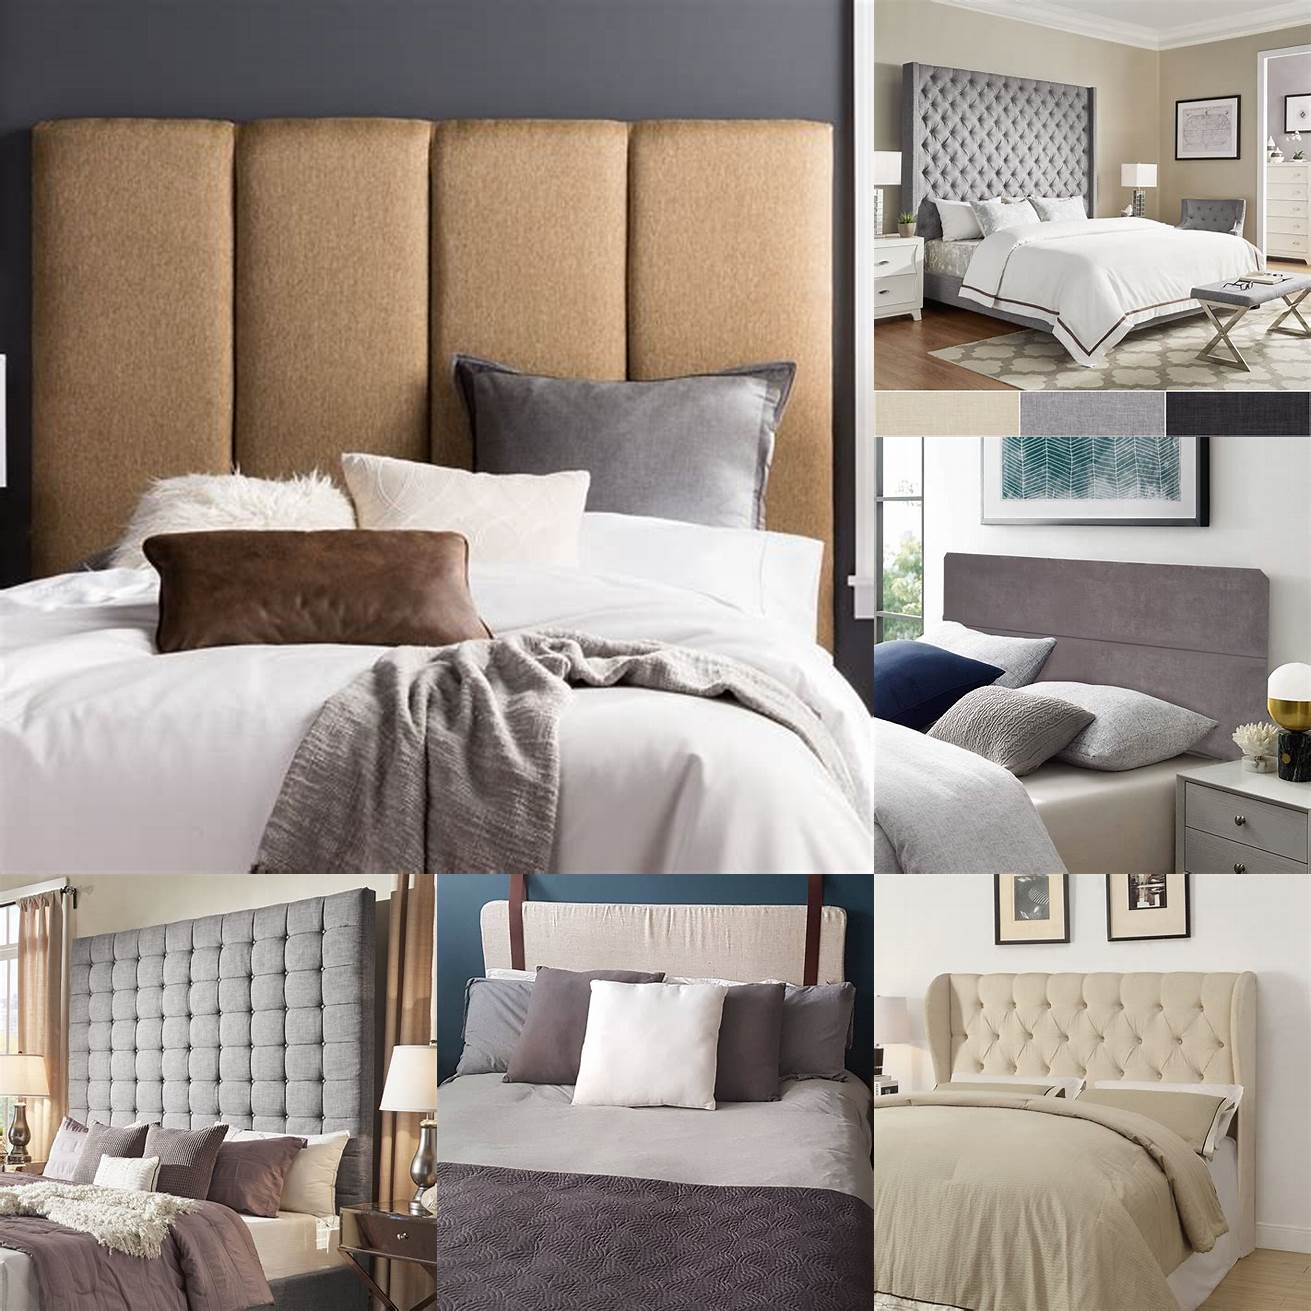 Soundproofing - The cushioned headboards on upholstered beds can help to absorb sound making them a good choice for those who live in noisy households